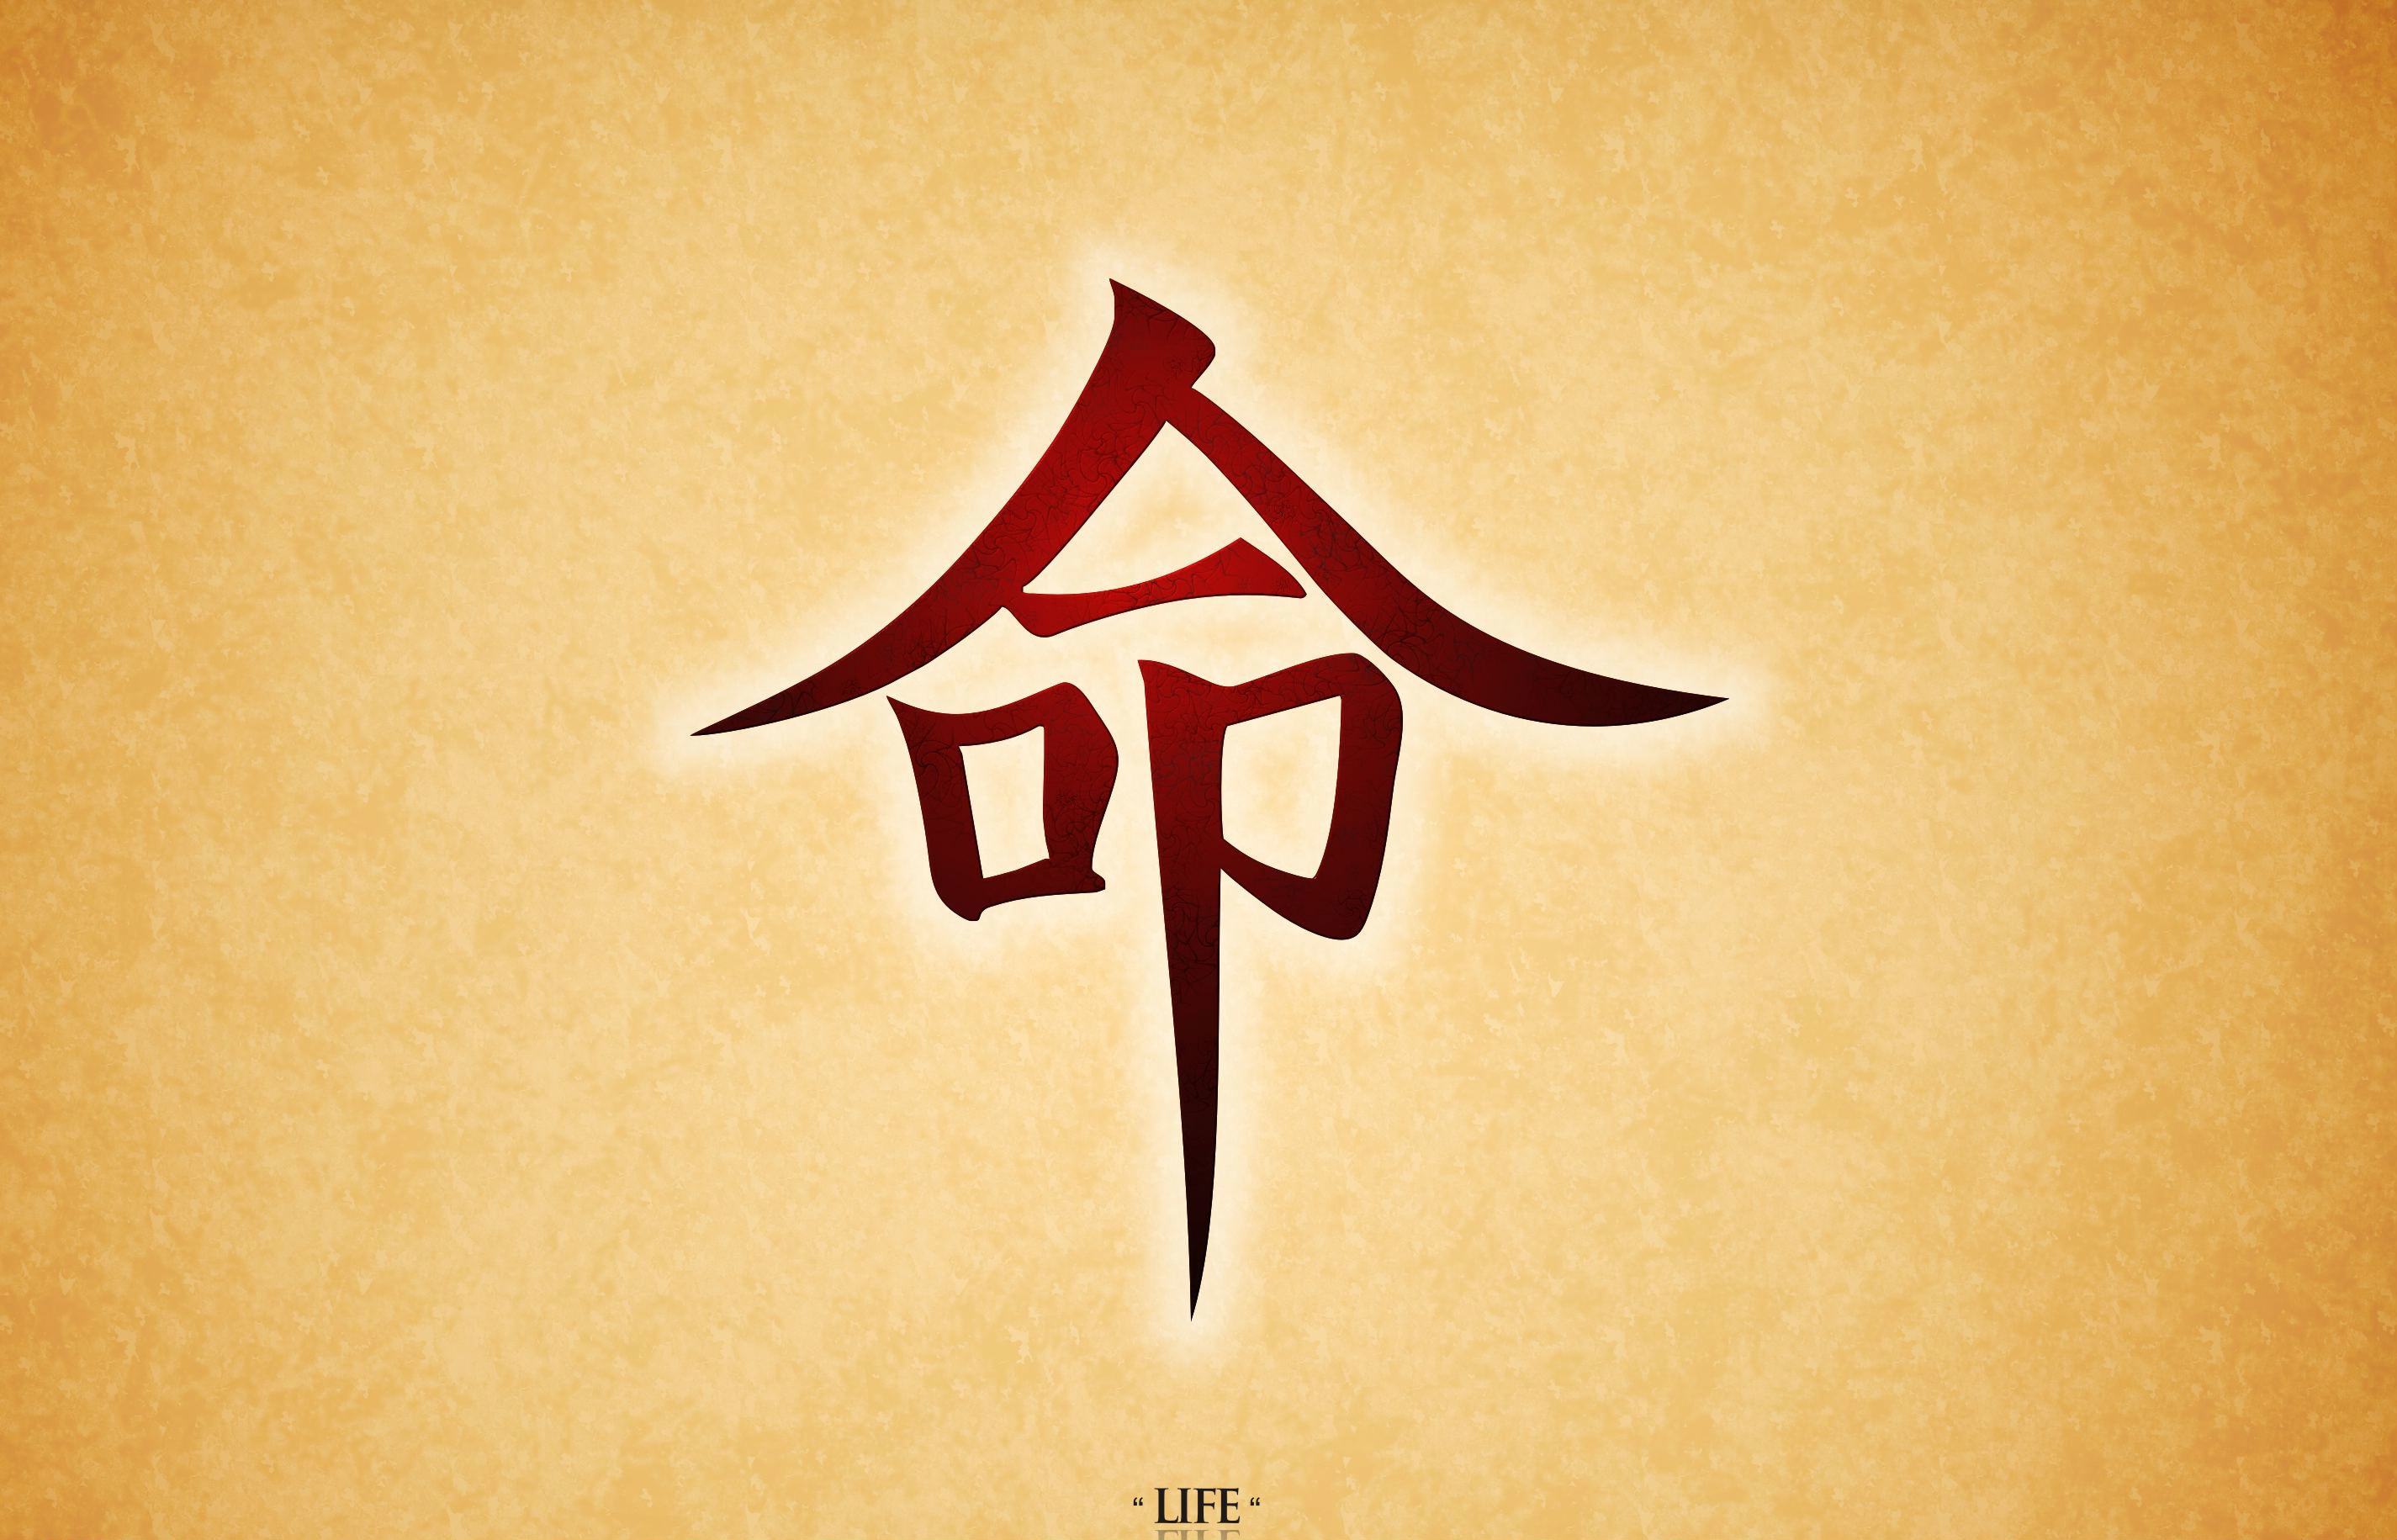 2850x1831 Free life symbol in japanese wallpaper background